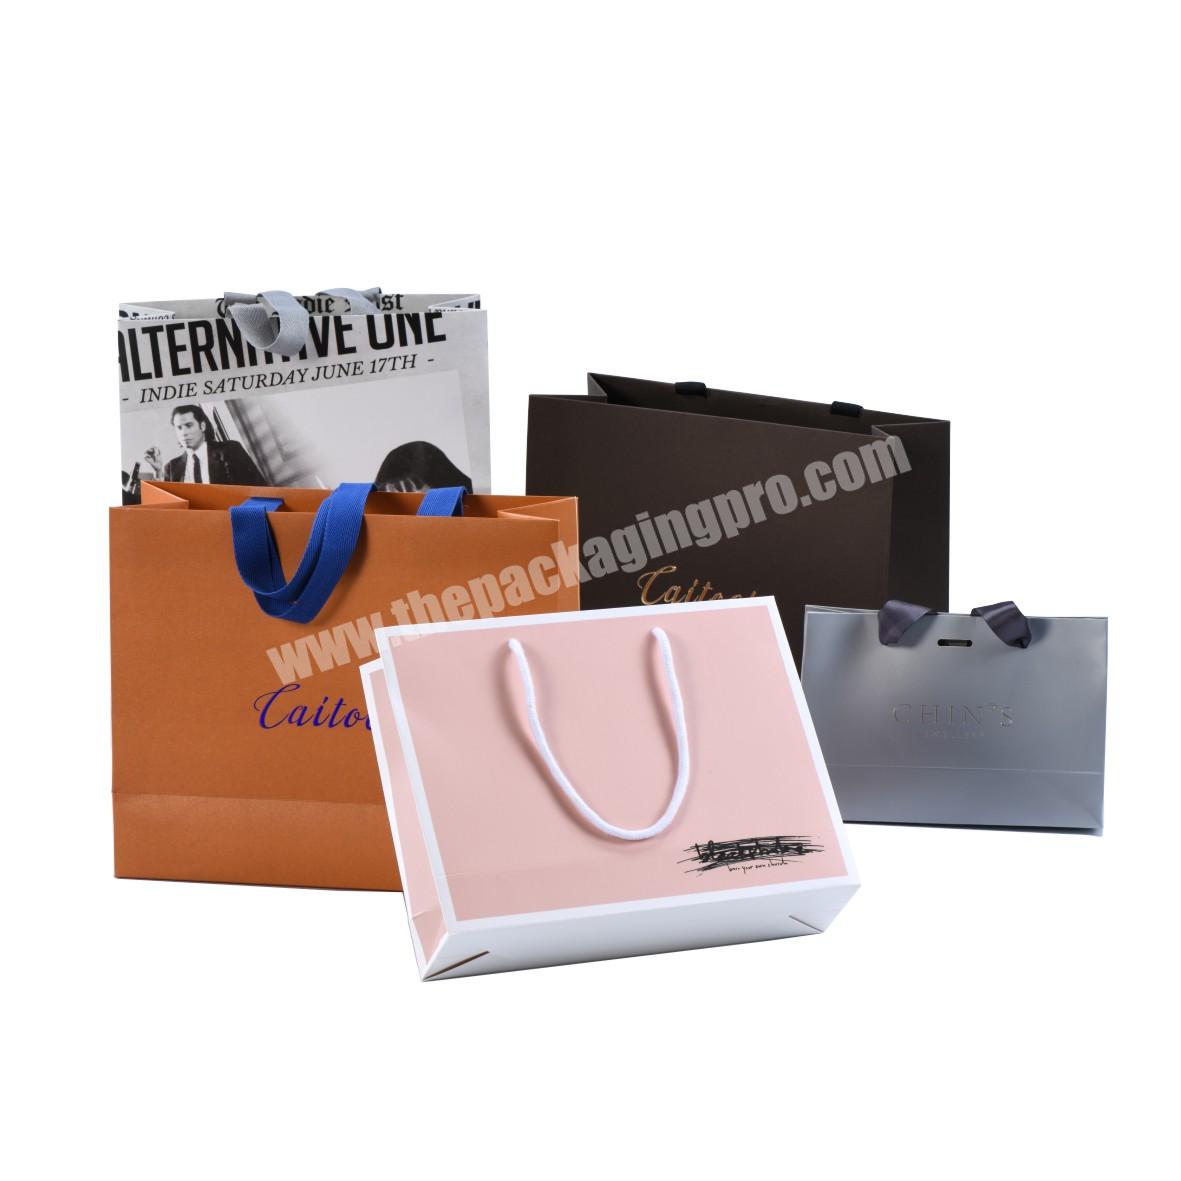 Wholesale Luxury Matte Black Gift Shopping Paper Bag With Logo For Clothing Custom Packaging Bag